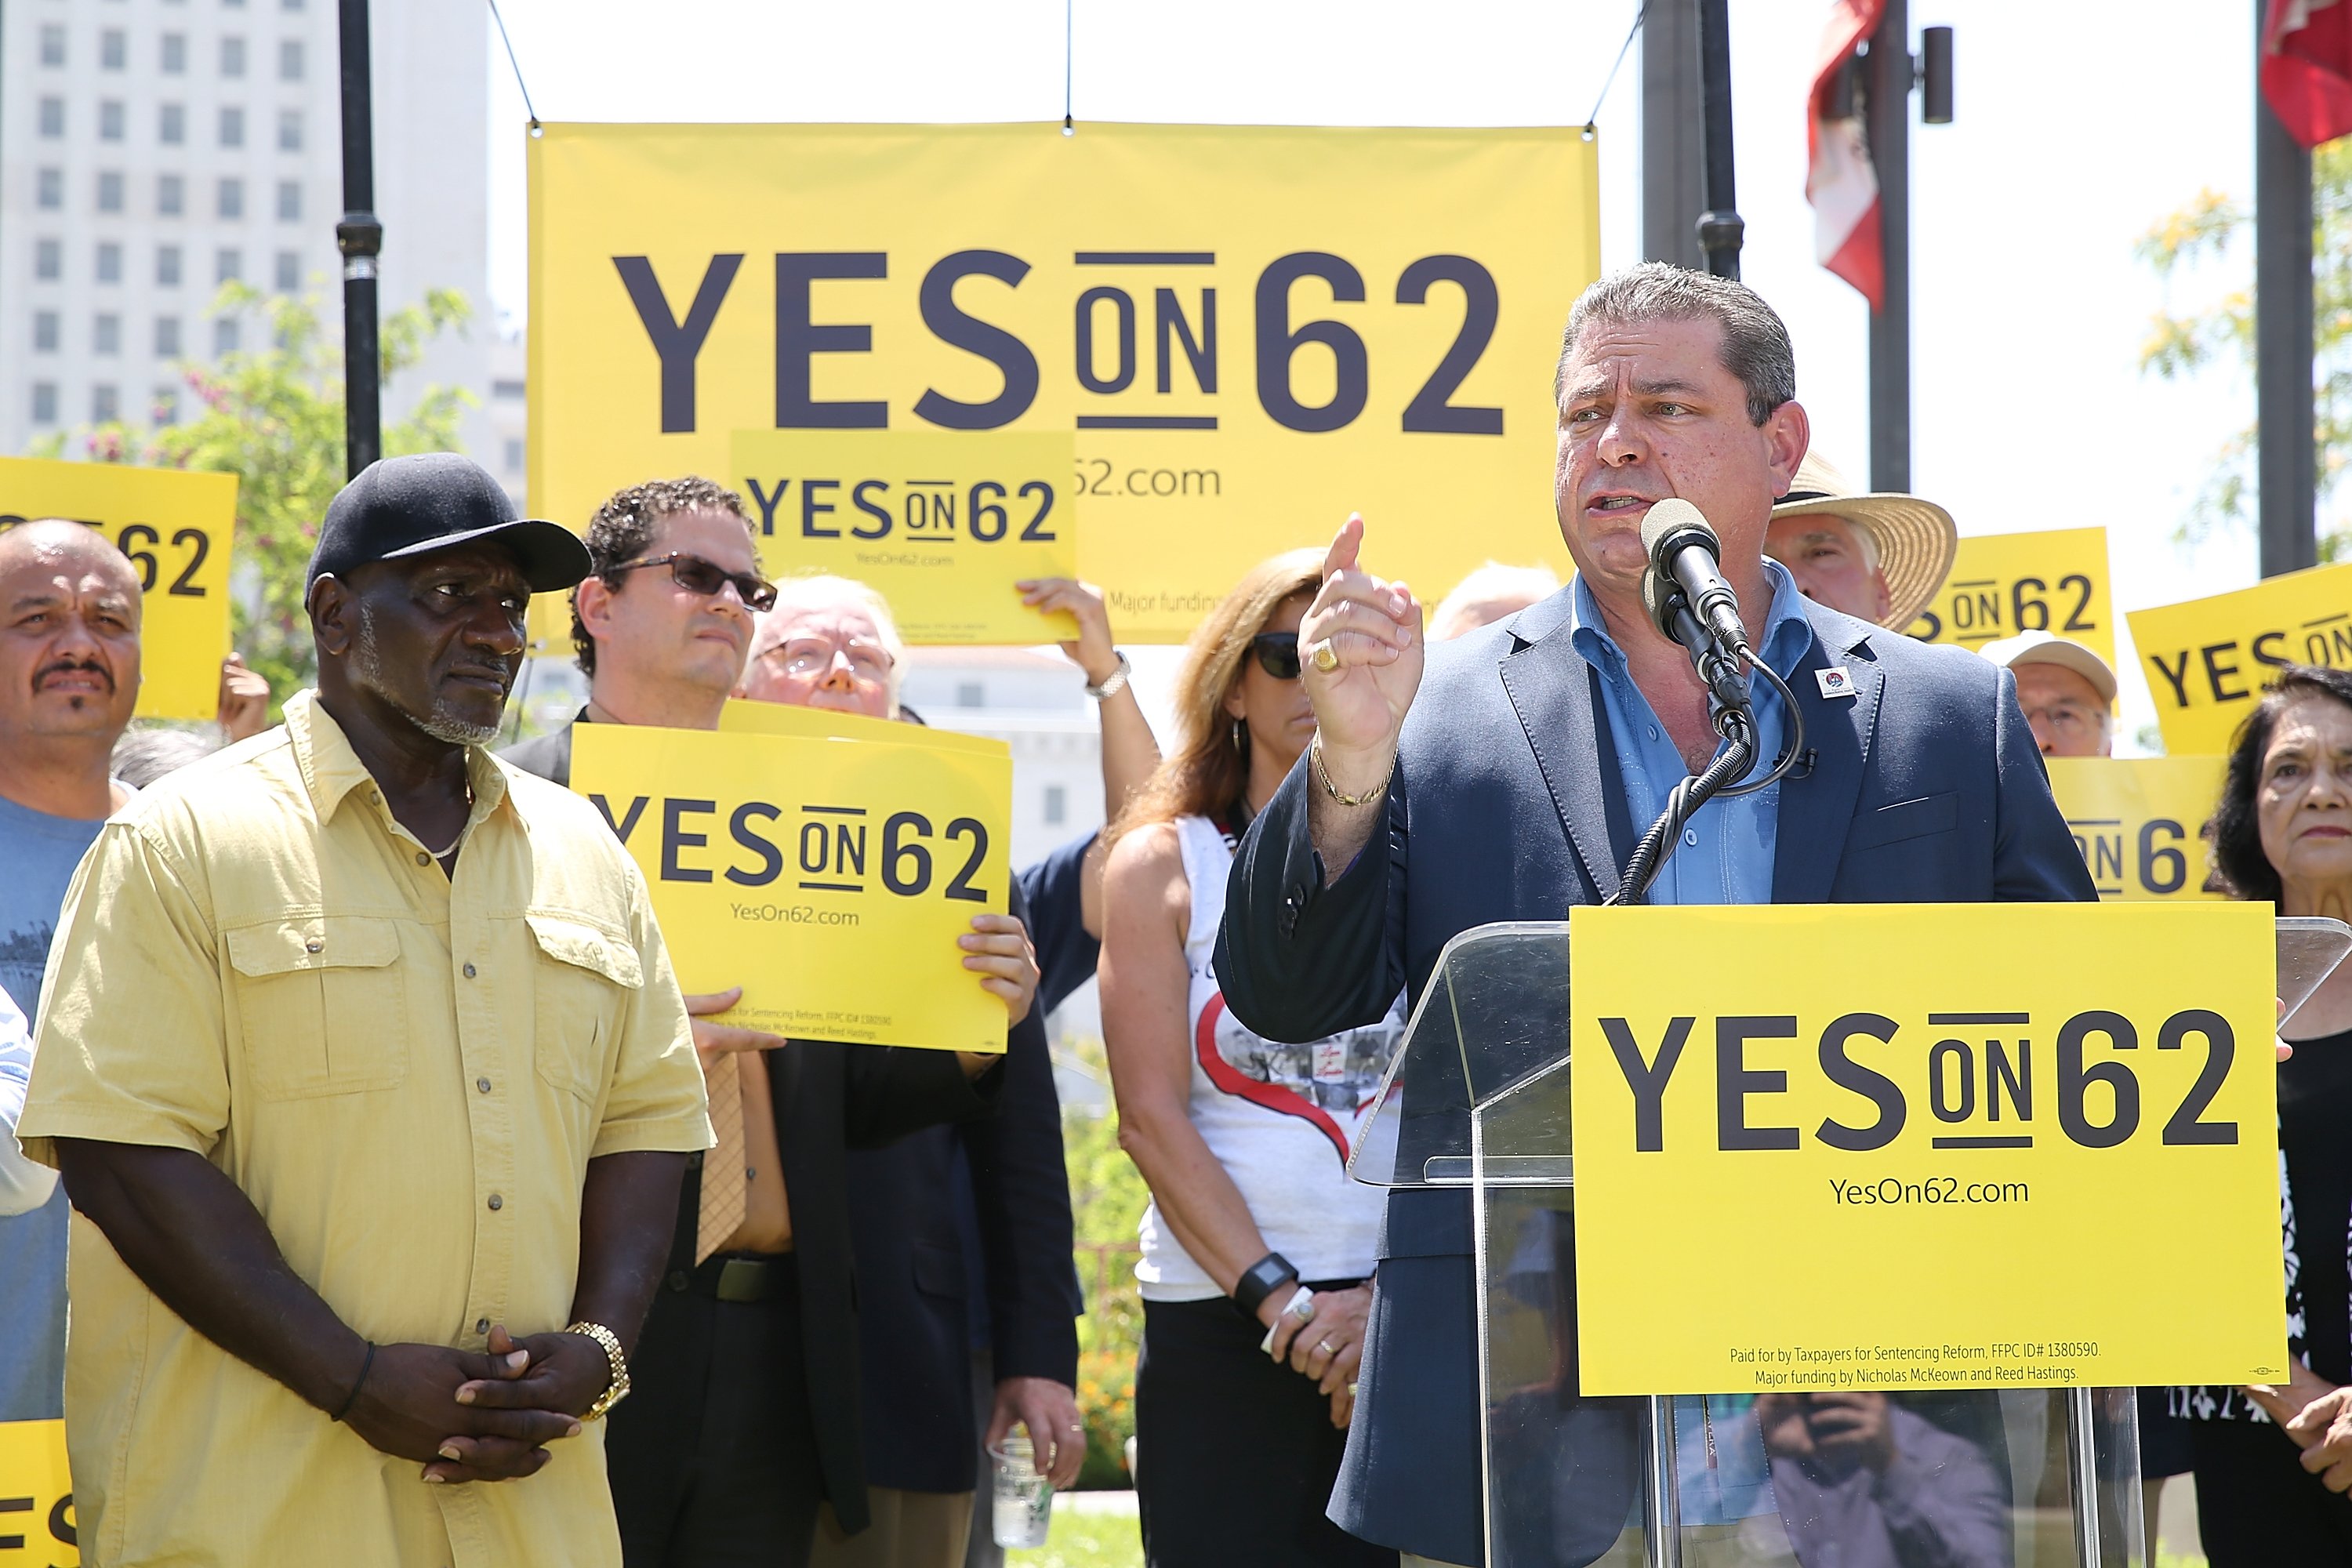 LOS ANGELES, CA - JULY 14: Chairman of the Los Angeles County Democratic Party Eric Bauman (R) speaks onstage during the Yes on Prop 62 Coalition Announcement at Los Angeles Grand Park on July 14, 2016 in Los Angeles, California. (Photo by Phillip Faraone/Getty Images